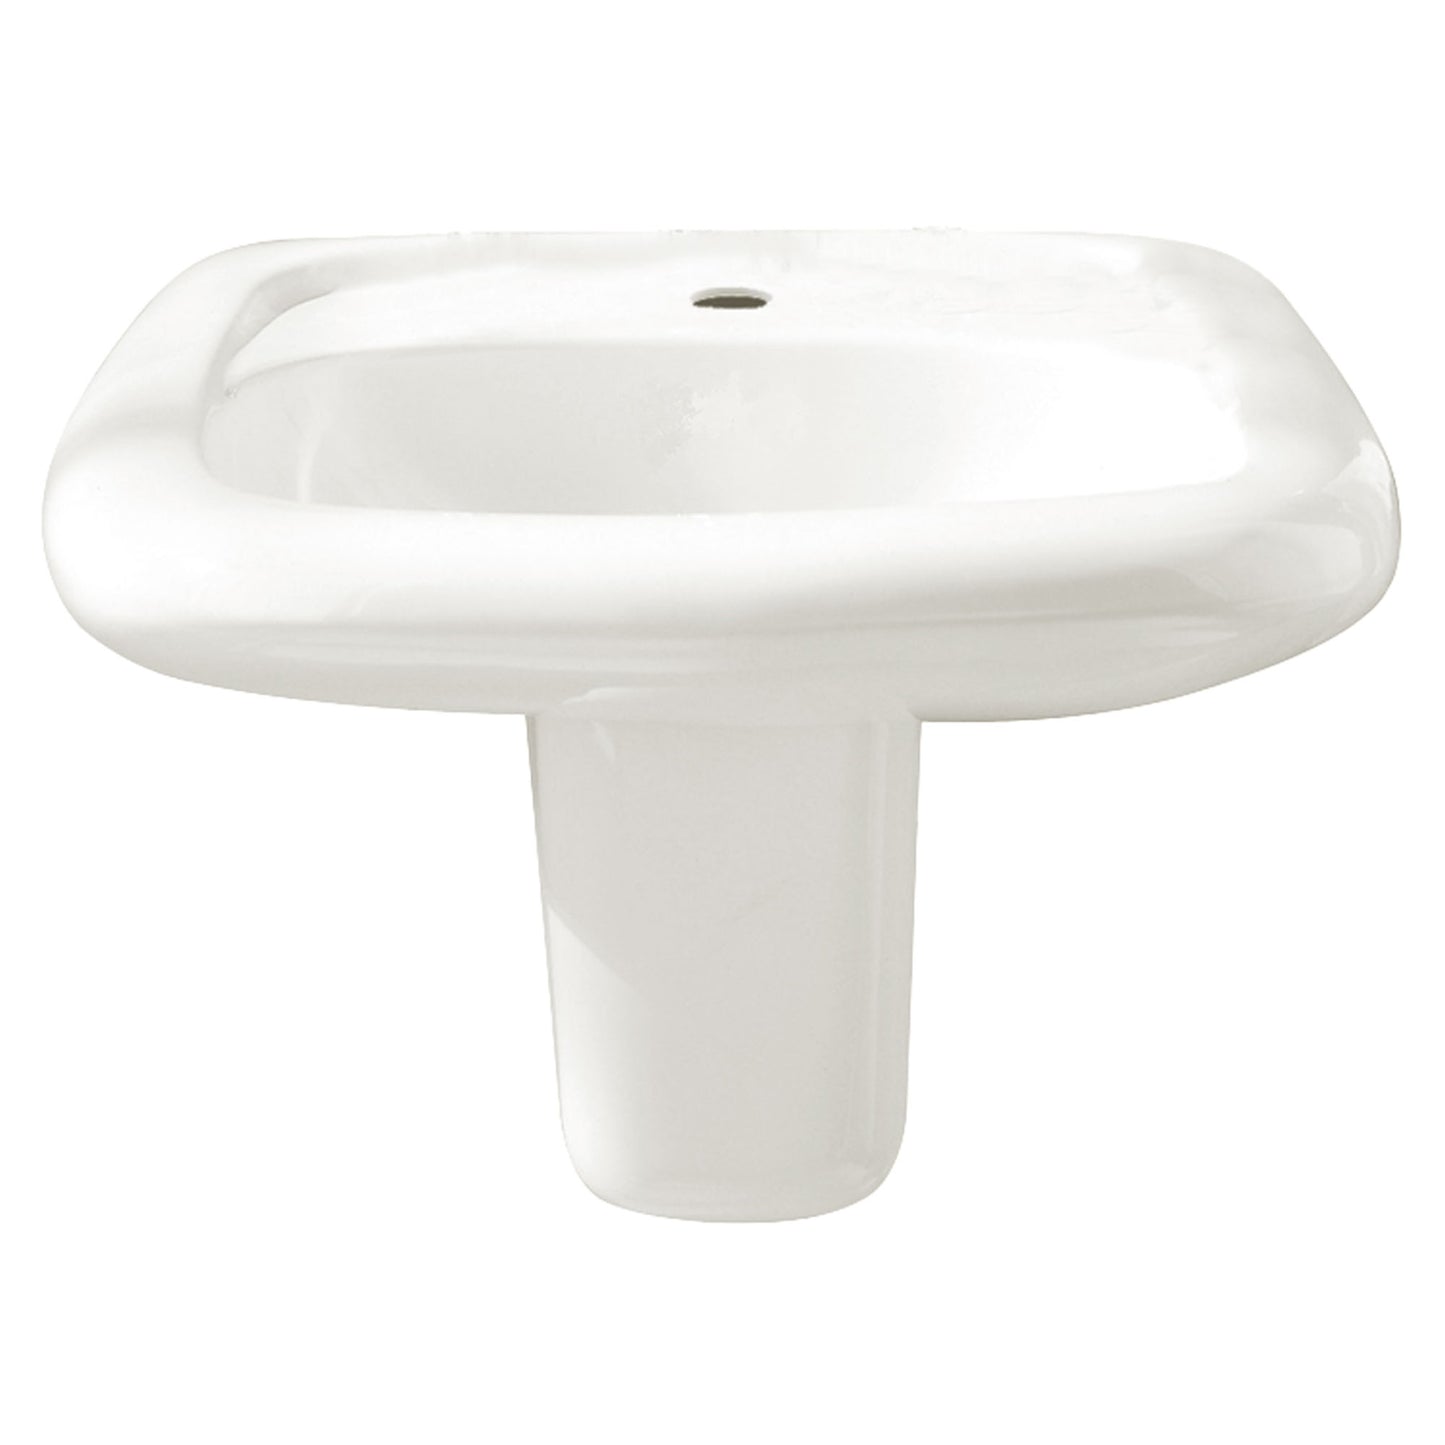 AMERICAN-STANDARD 0955901EC.020, Murro Wall-Hung EverClean Sink Less Overflow With Center Hole Only in White